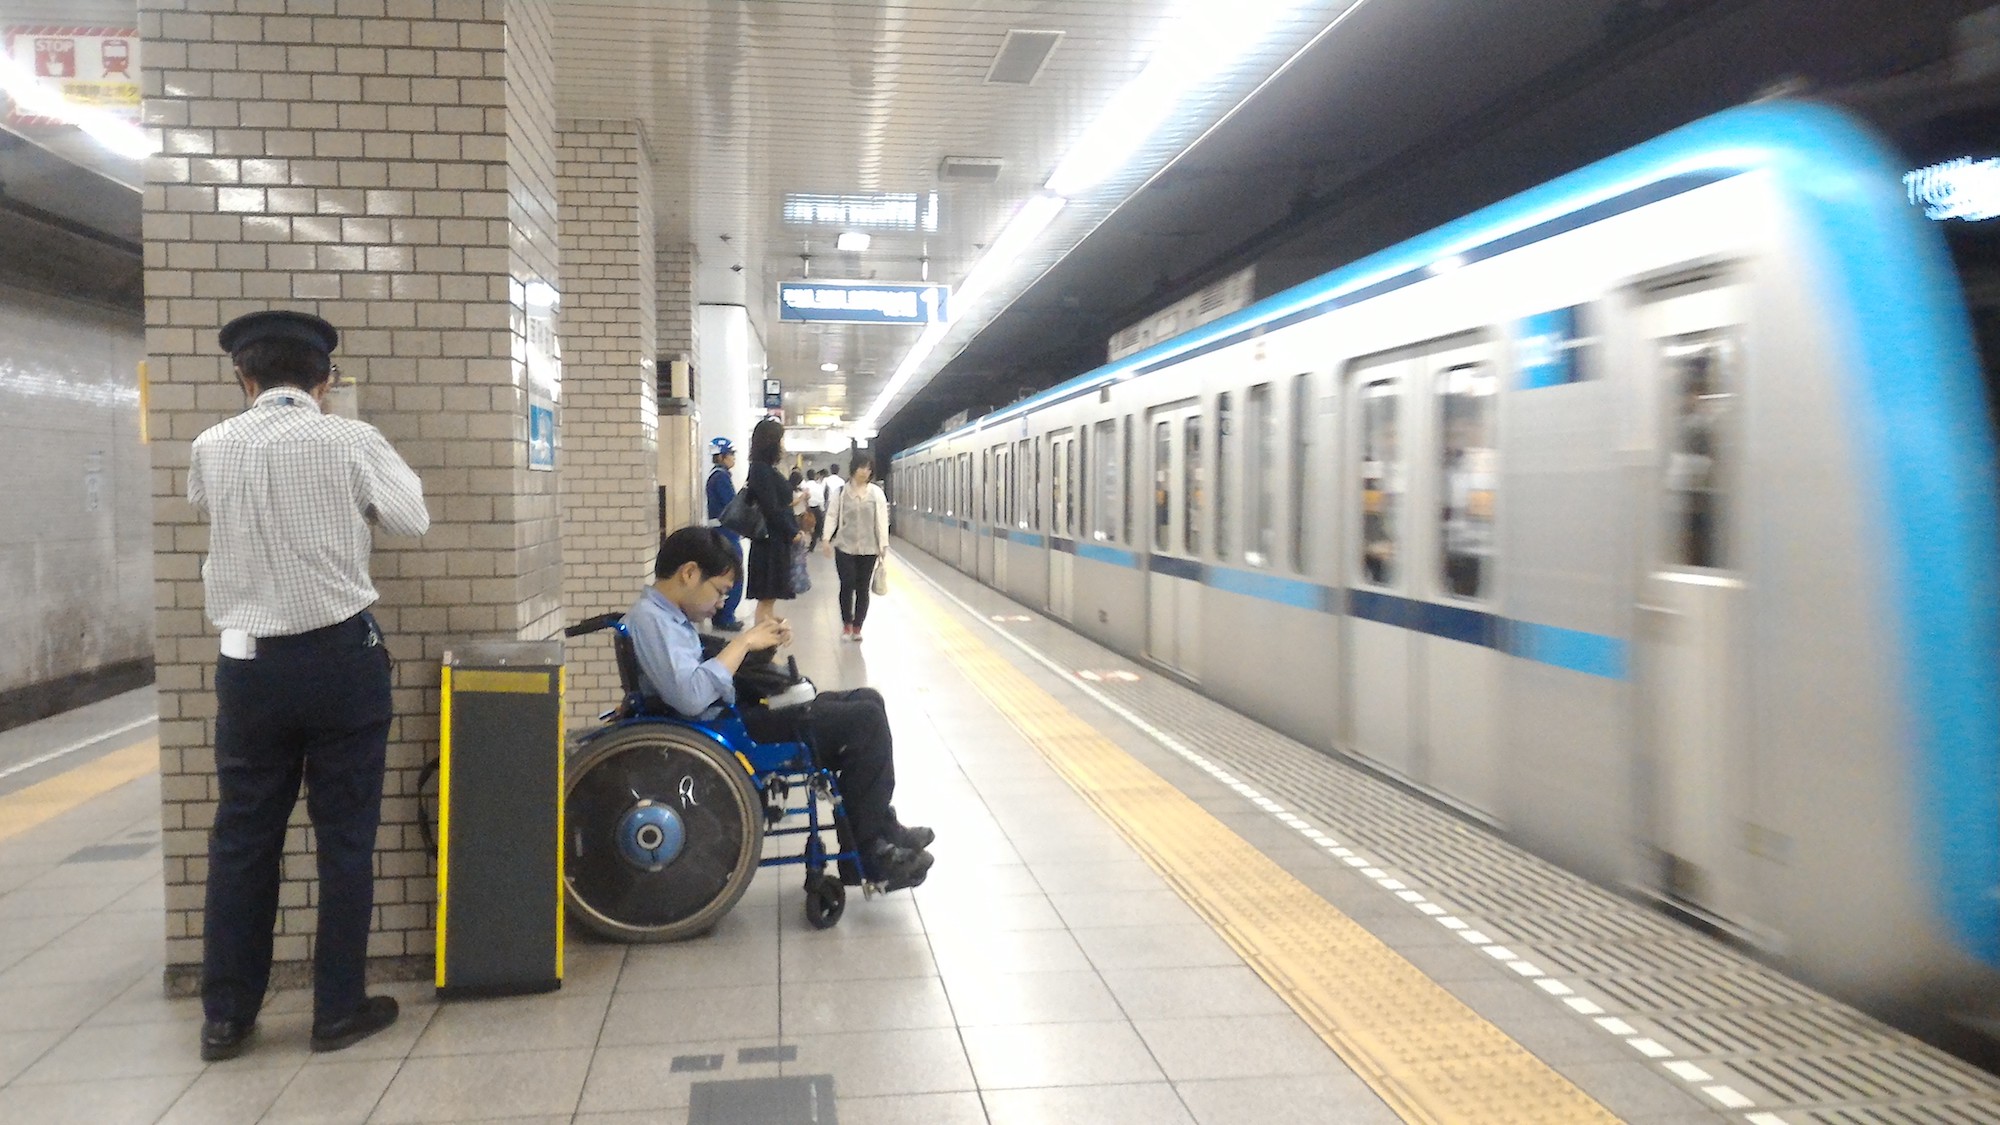 Reading information on where lifts are located in Tokyo subway stations